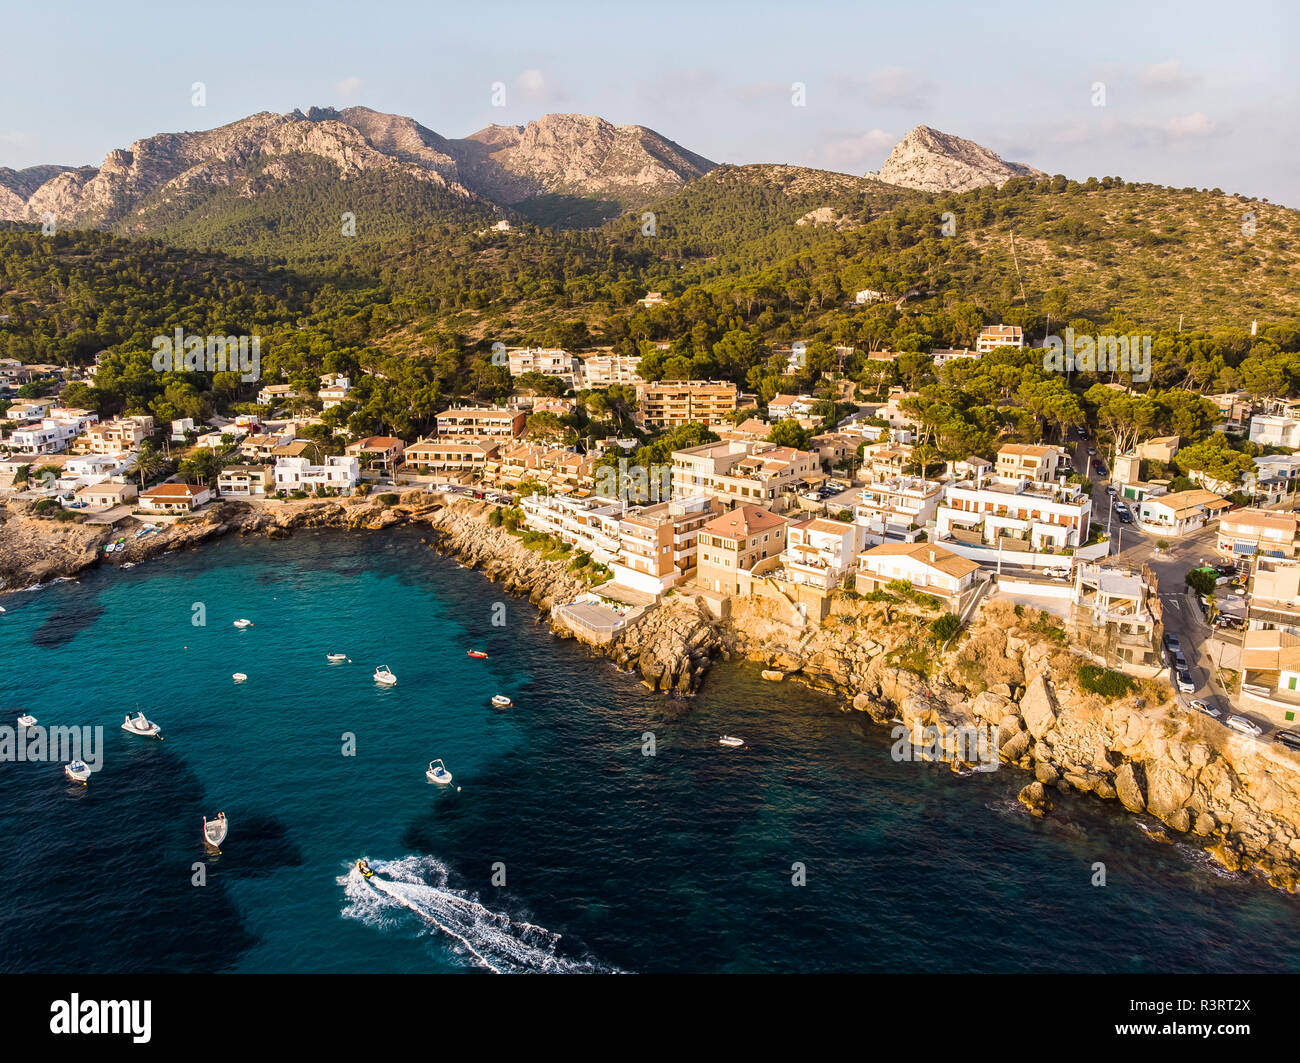 Spain, Balearic Islands, Mallorca, Aerial view of Bay of Sant Elm Stock Photo